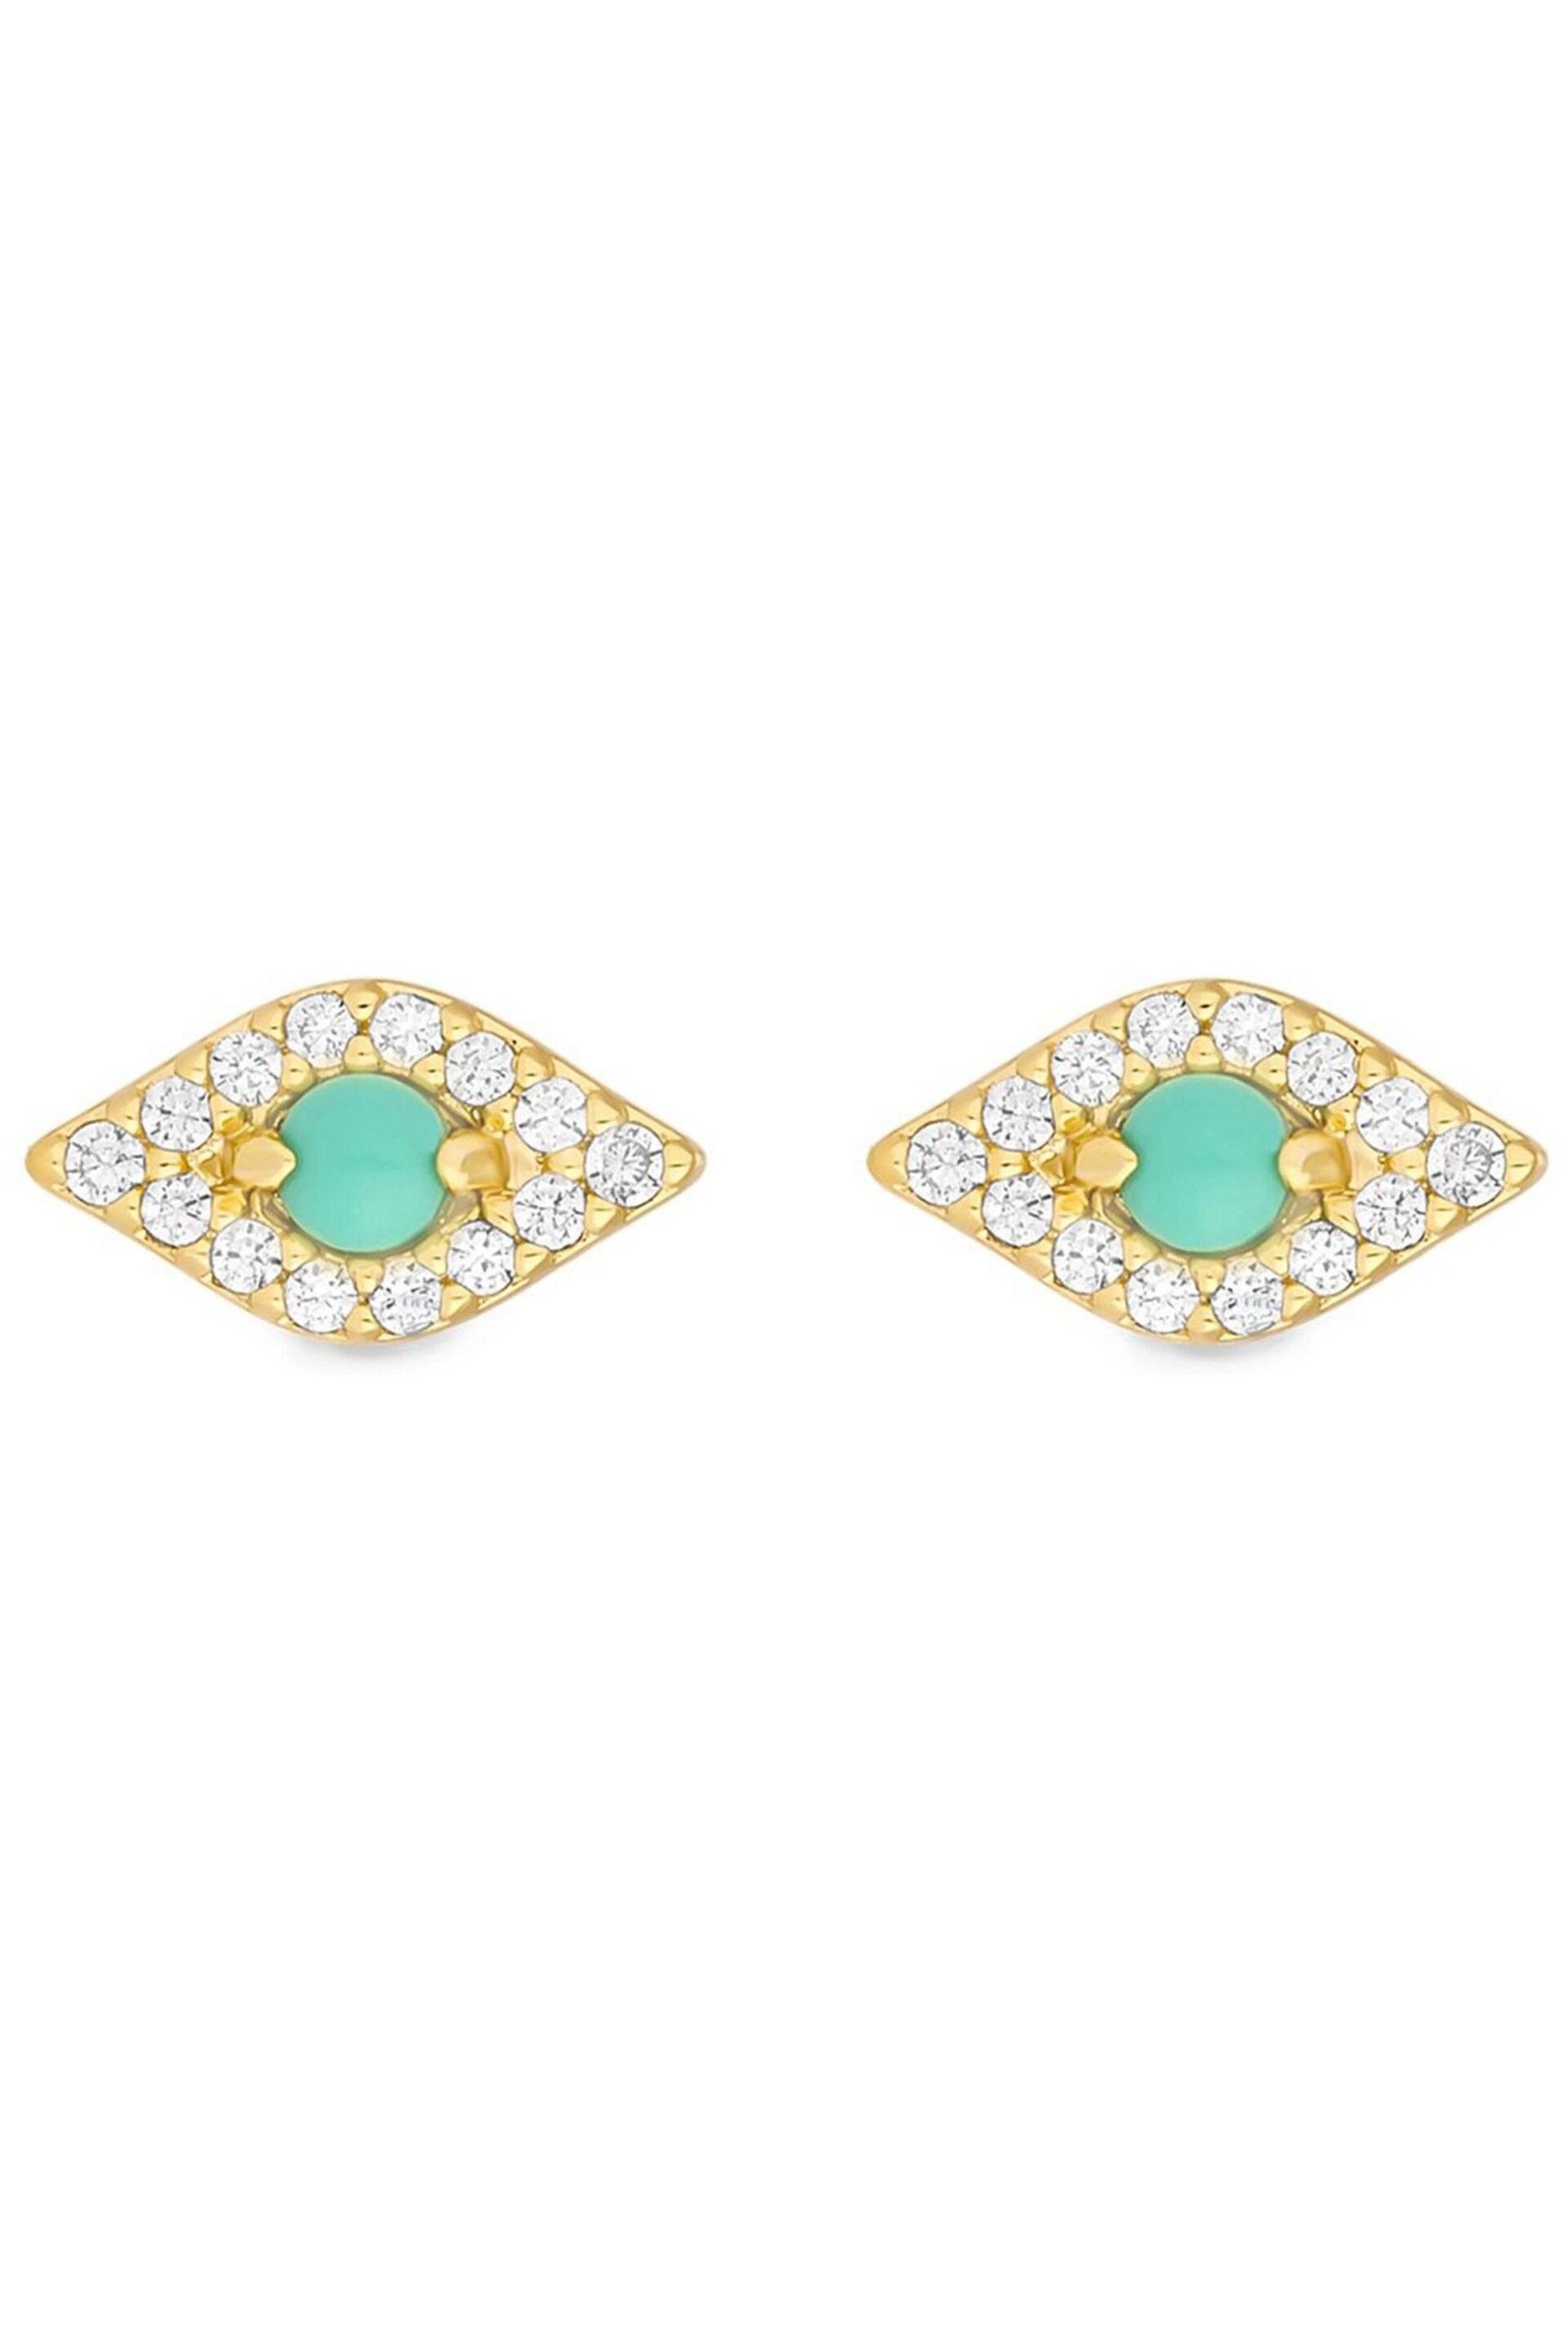 Inicio Gold Plated Gift Pouch Evil Eye Stud Earrings - Image 3 of 3